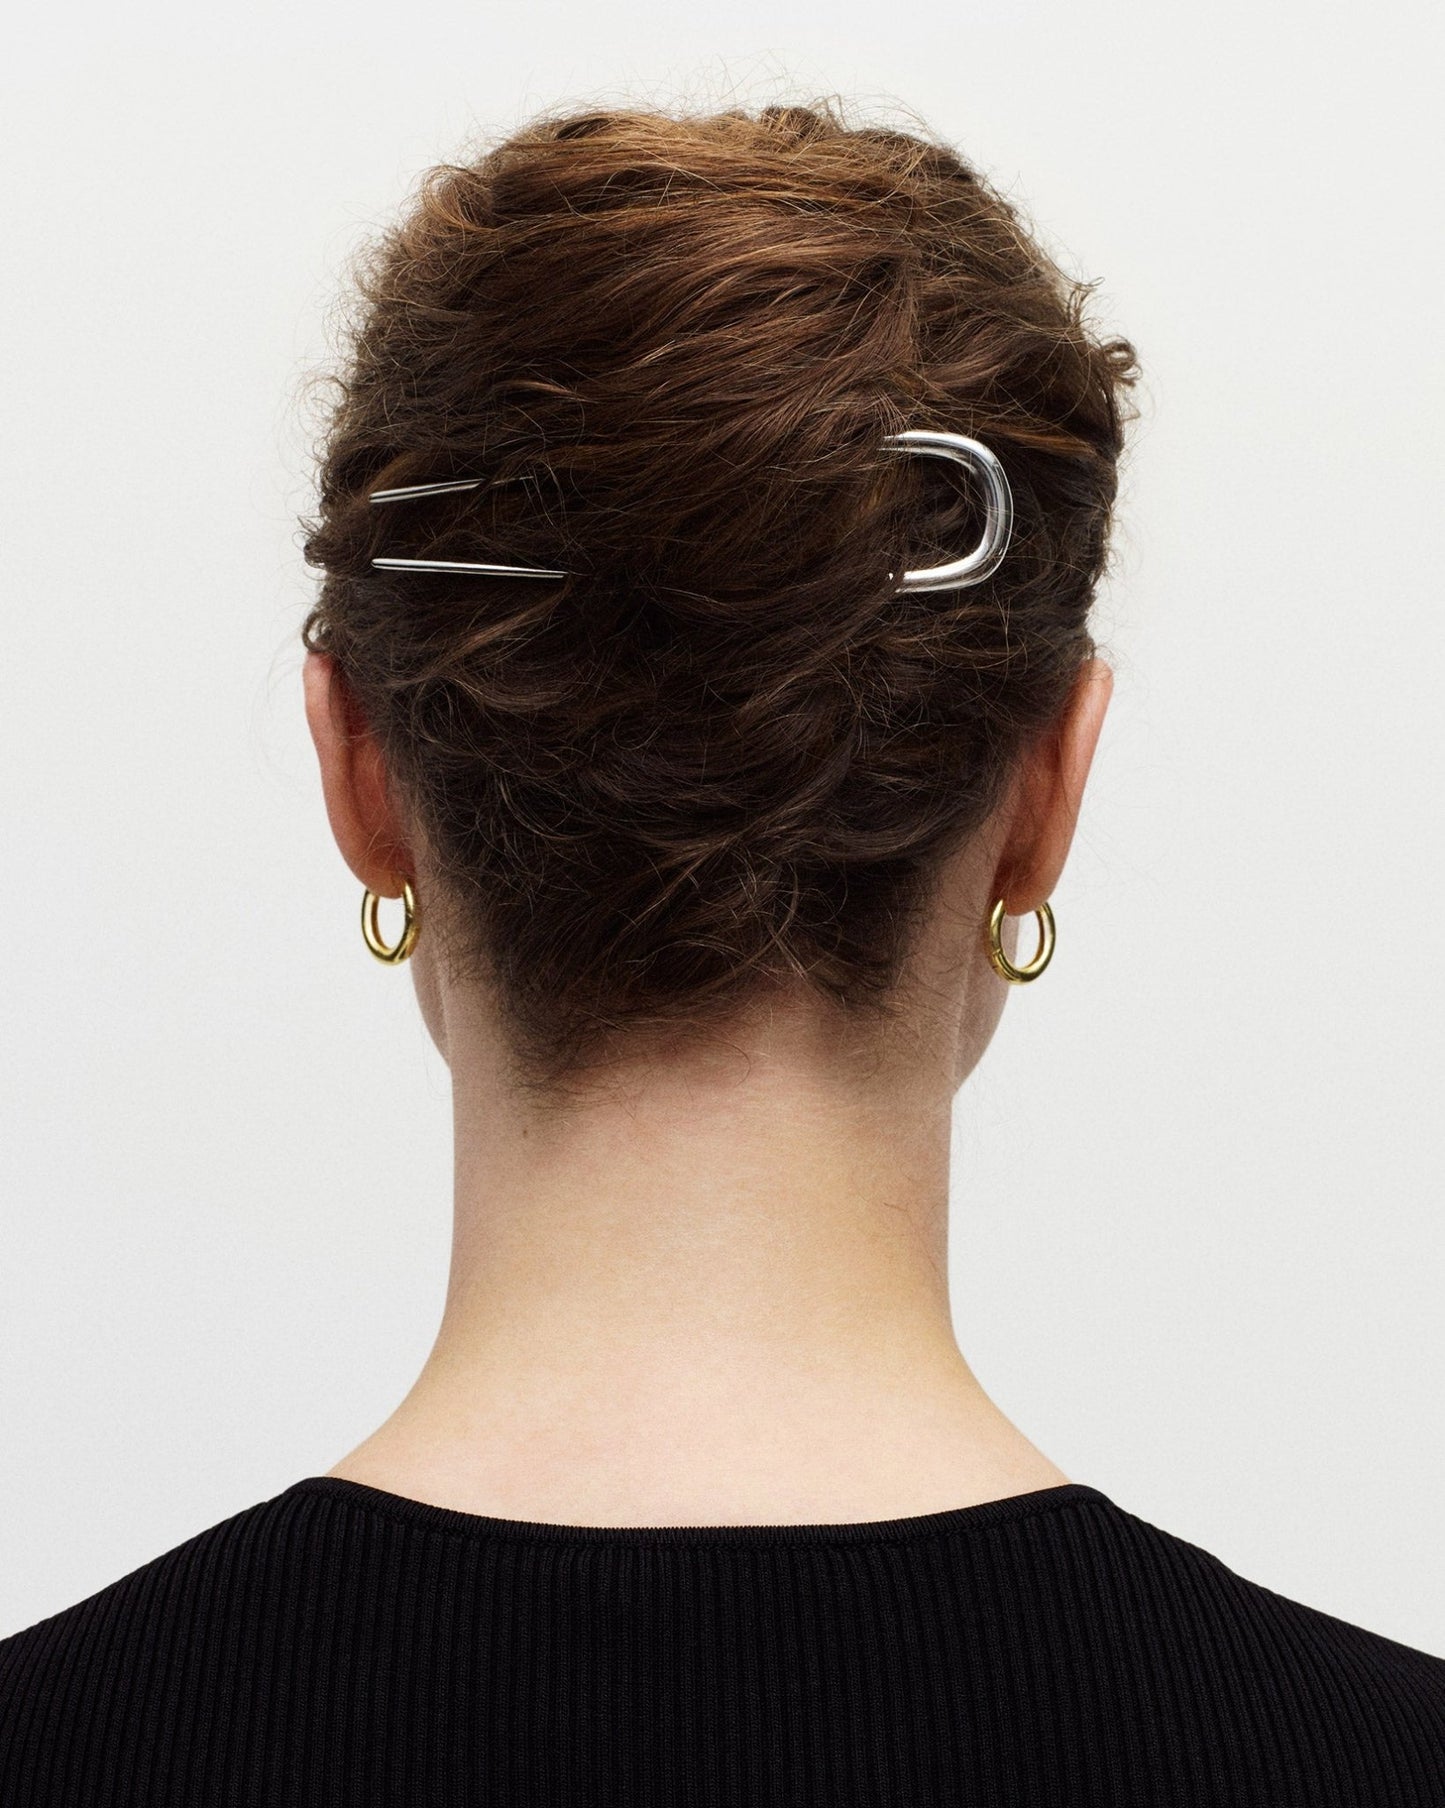 Midi Oval French Hair Pin in Gold